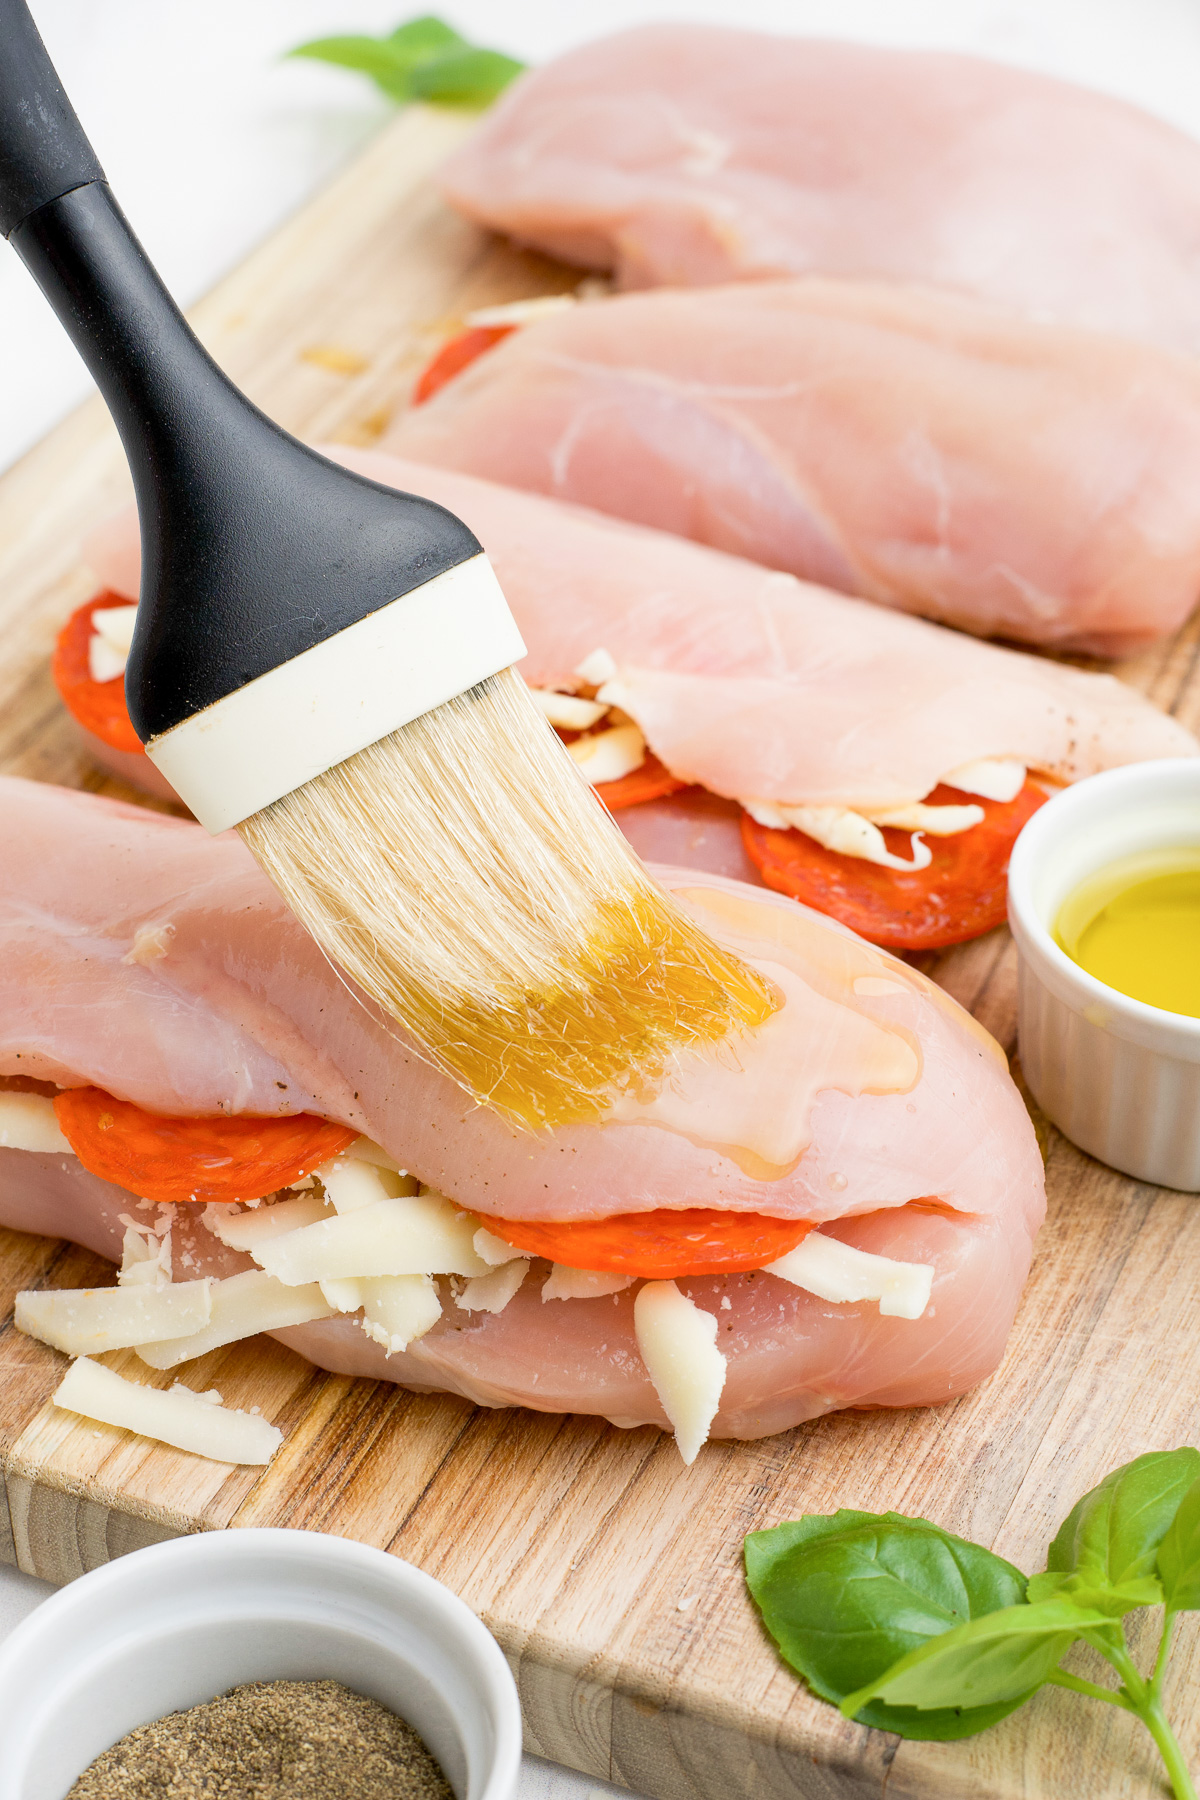 Raw chicken breasts stuffed with cheese and pepperoni being brushed with oil from the side on a cutting board.